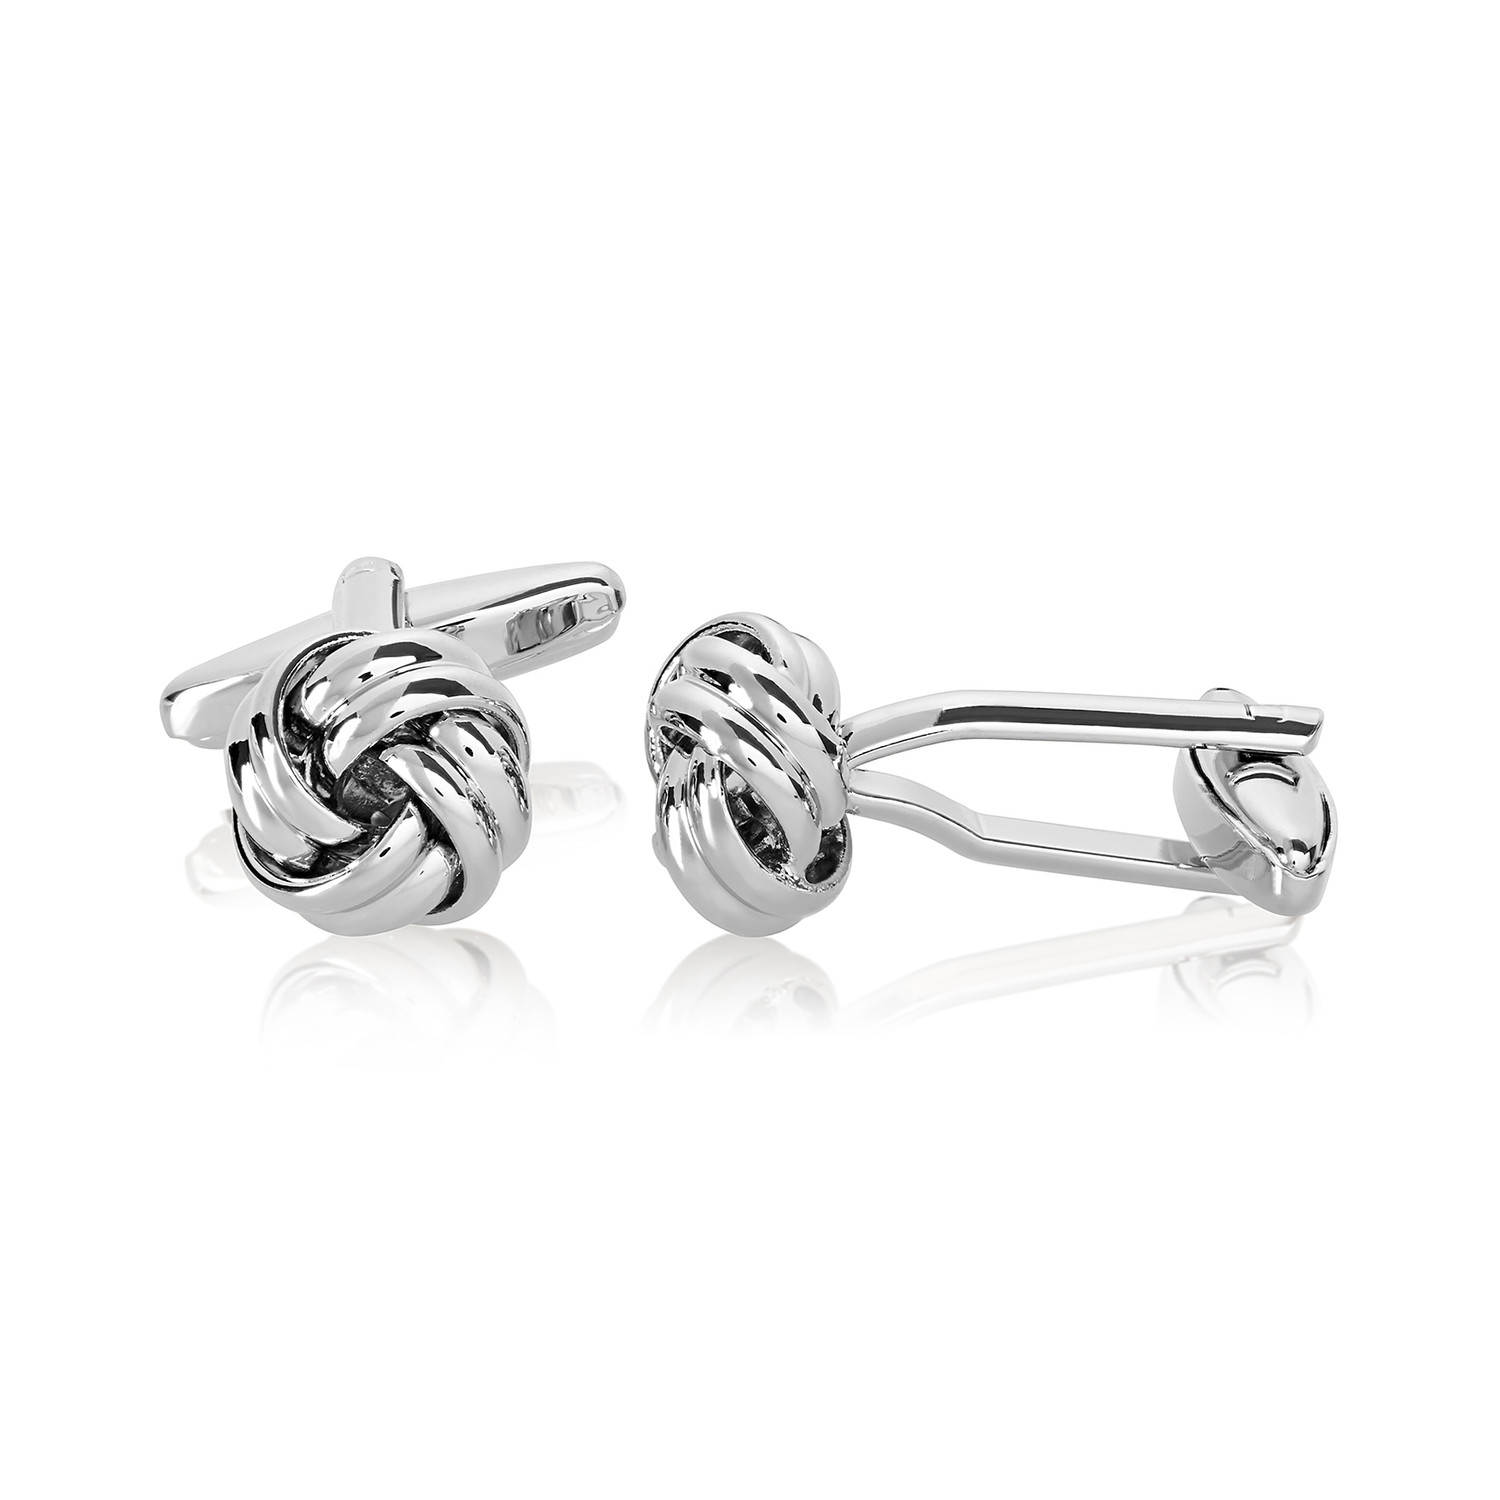 True Love Knot Cuff Links // Silver - West Coast Jewelry - Touch of Modern